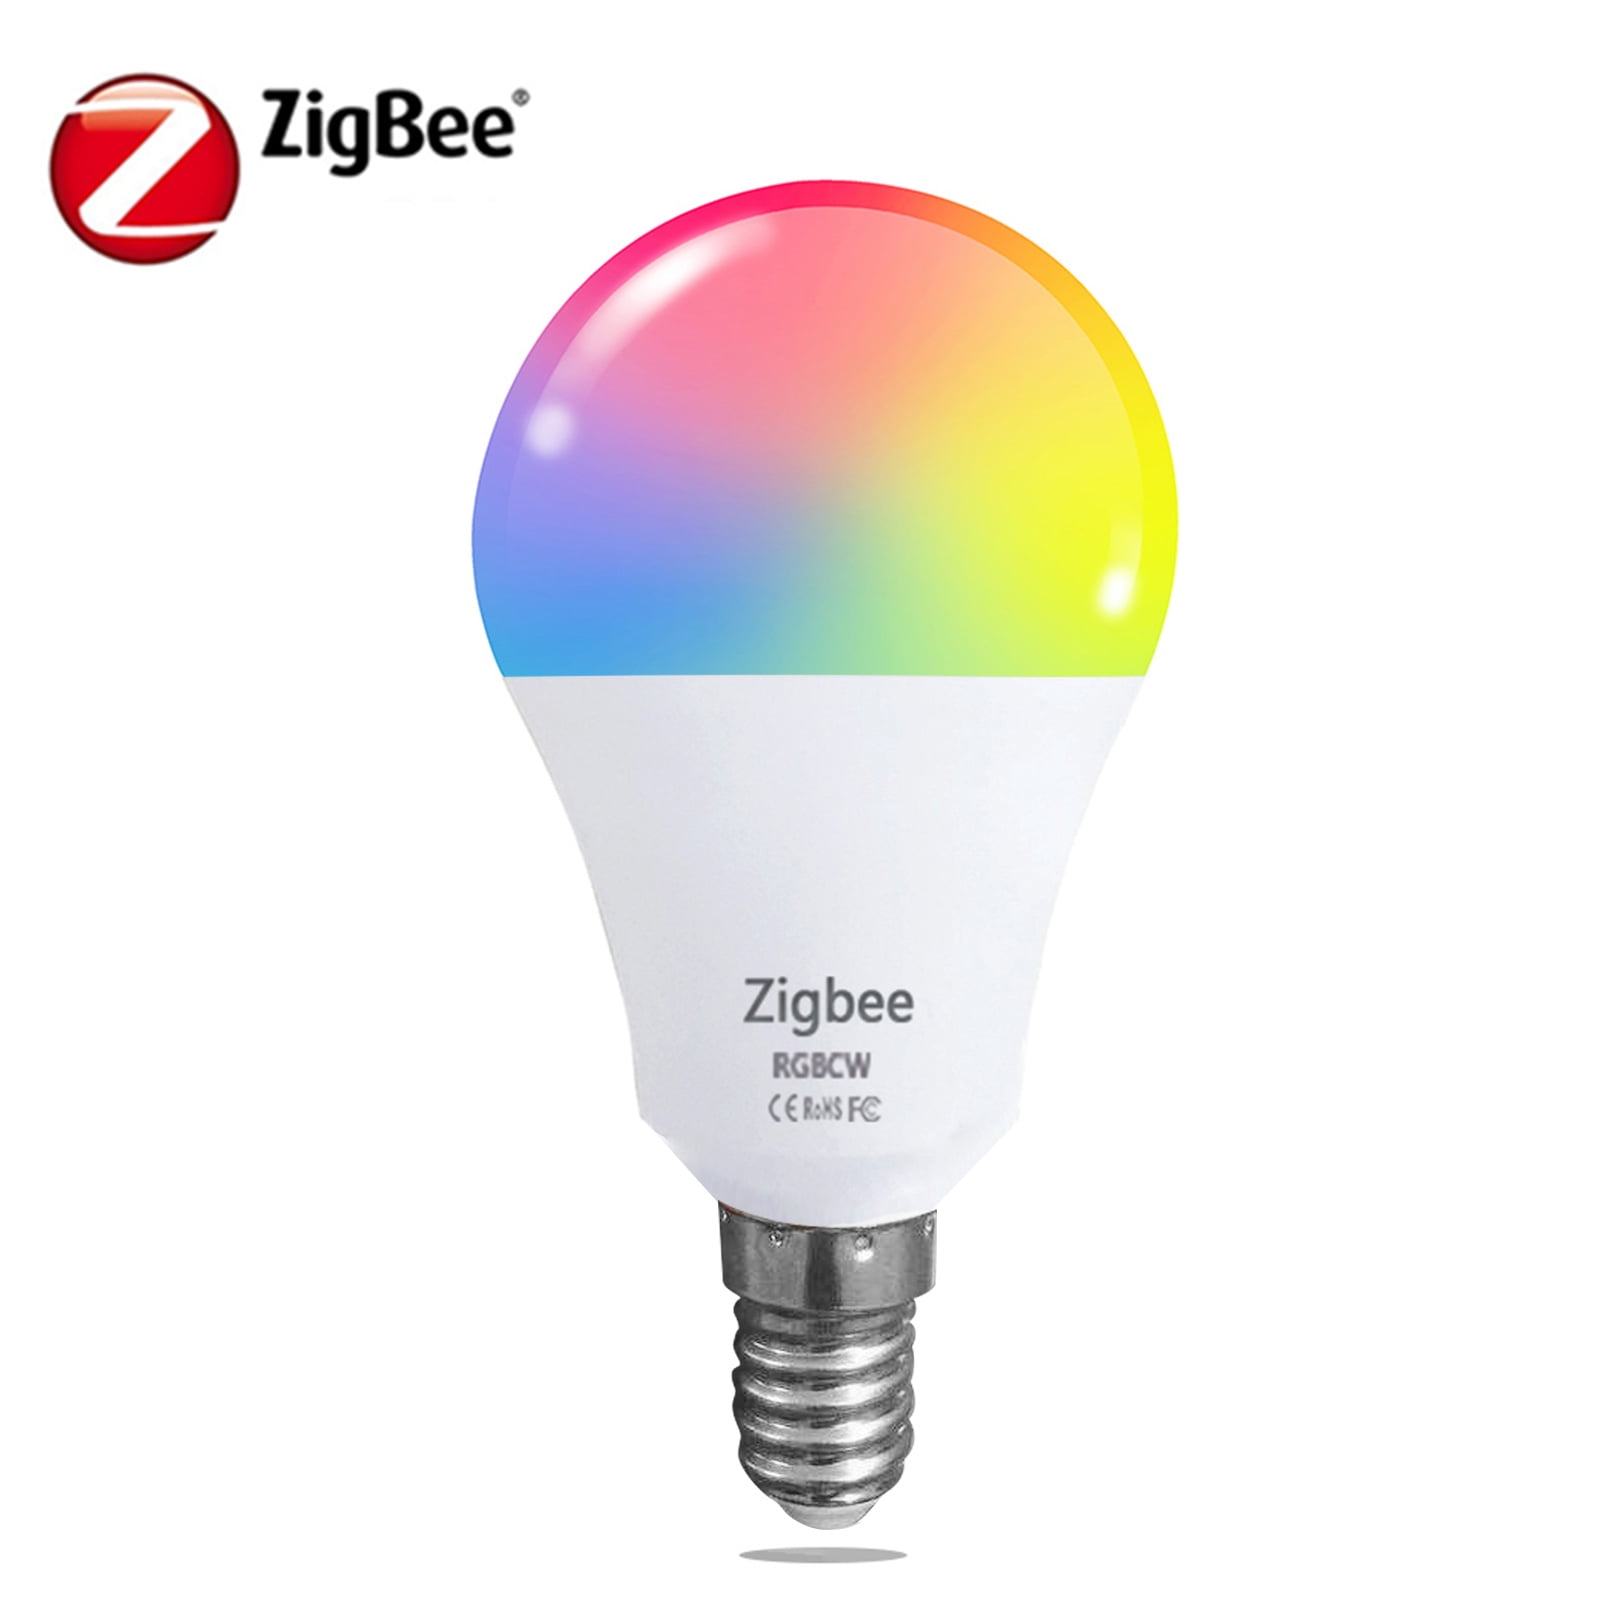 telescoop Saga Manhattan Docooler E14 WiFi Intelligent Light Bulb zigbee3.0 RGBW 10W LEDs Dimmable  Lamp Cup APP Control Cold & Warm Lights Compatible with-&-Home/IFTTT/Tmall  Genie Remote Bulb FC-TY001 - Walmart.com